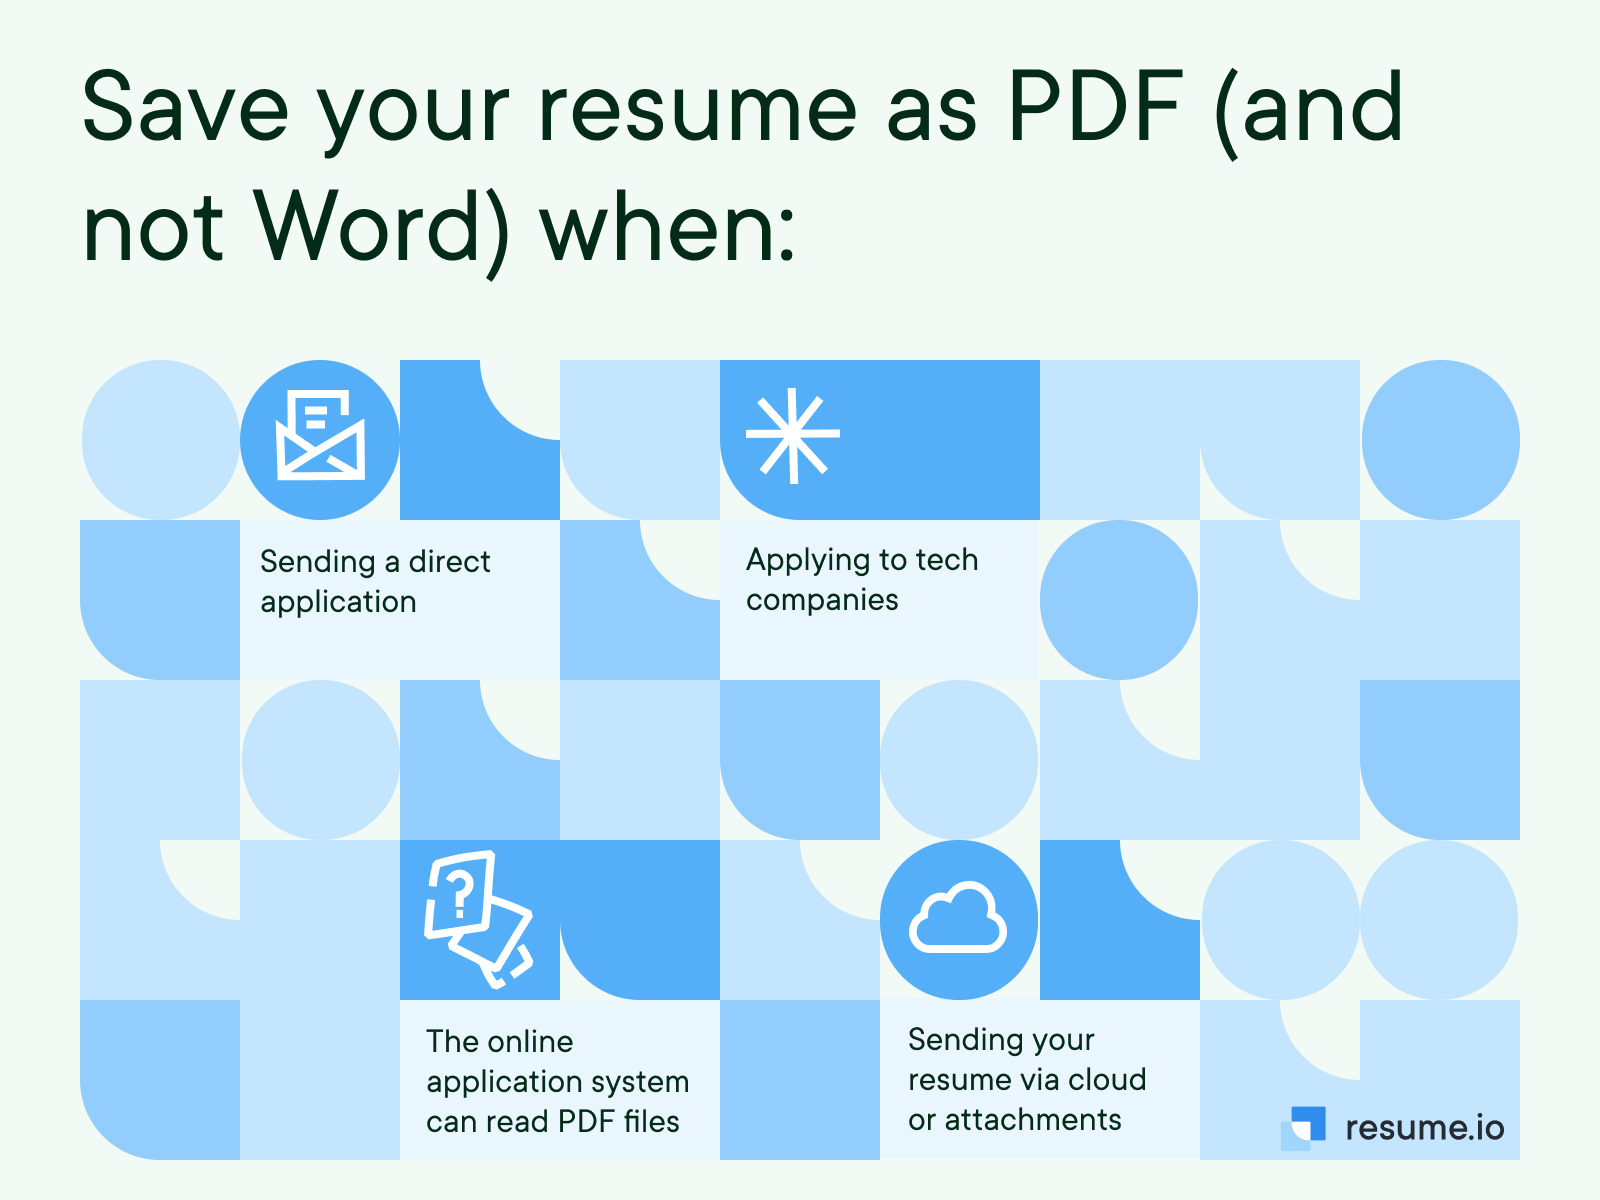 How to save your resume?